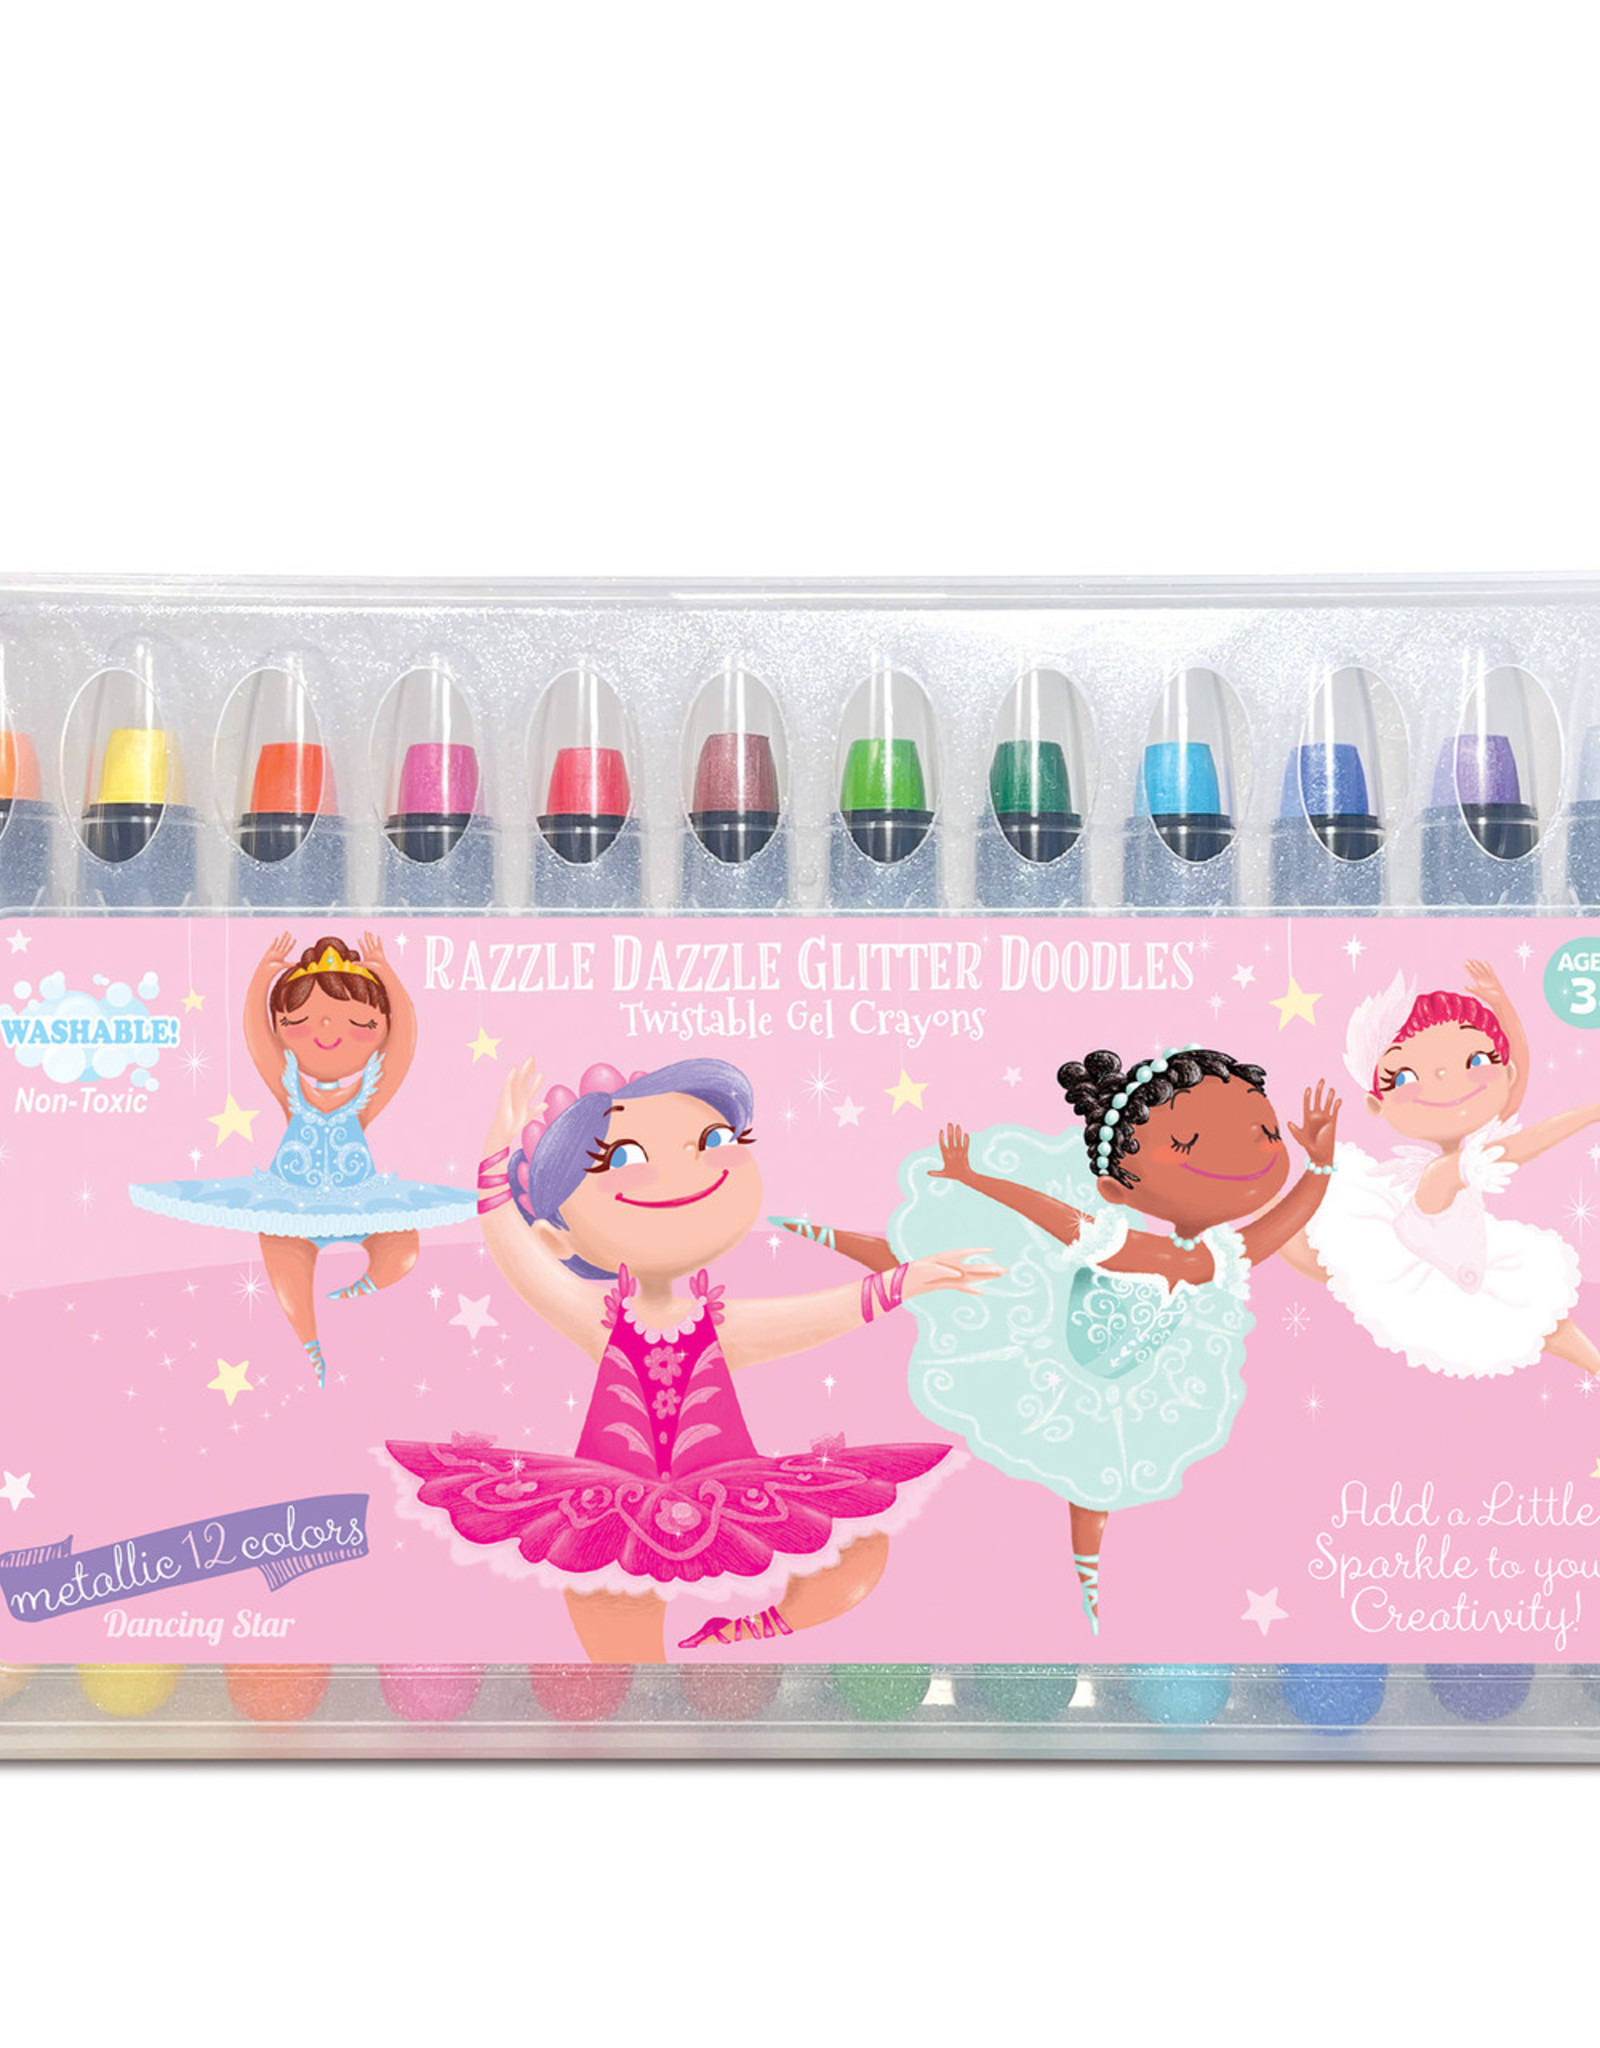 The Piggy Story Dry Erase Twistable Gel Crayons